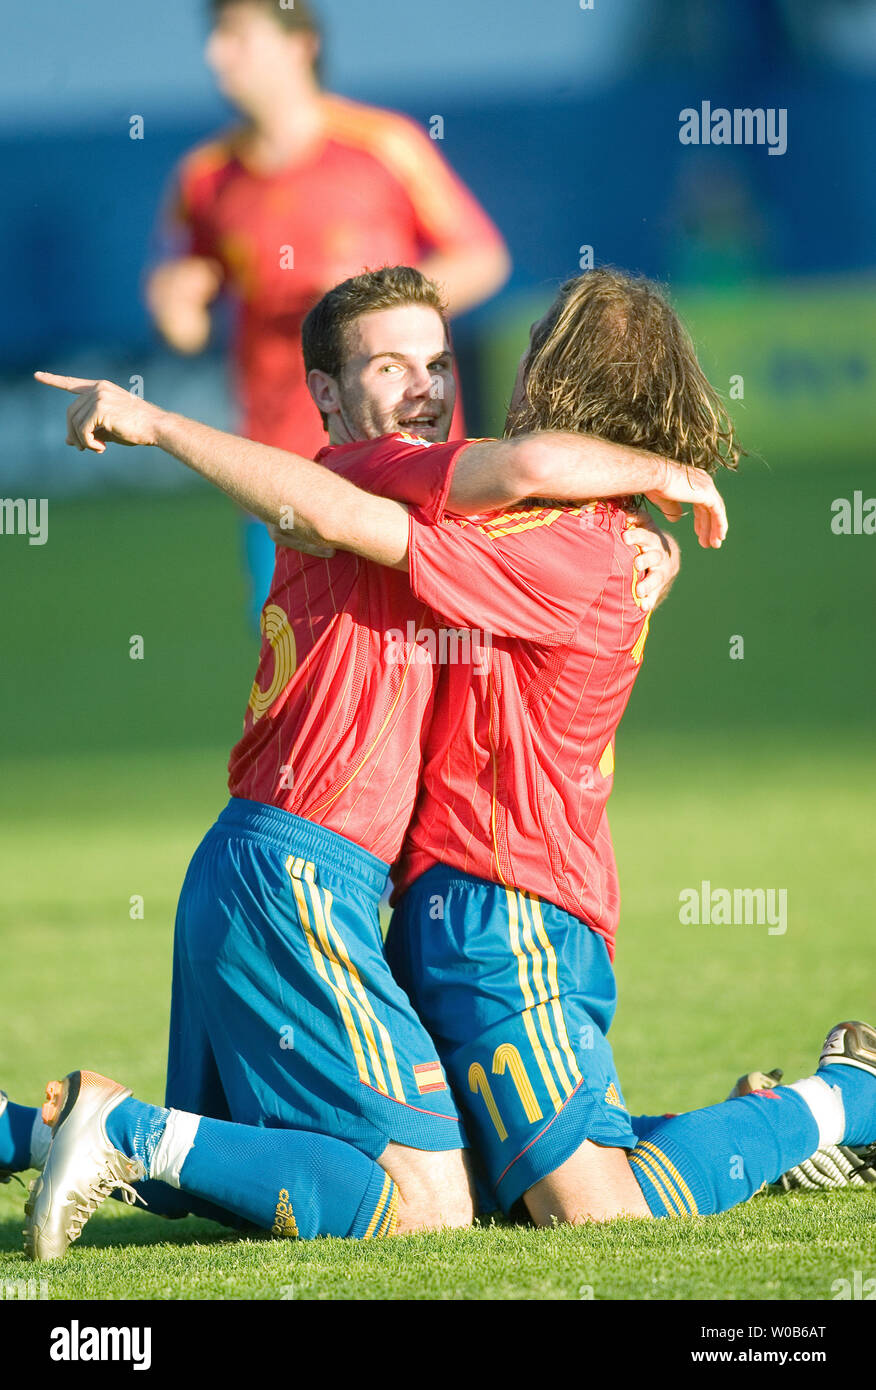 Diego Capel (R) celebrates with teammate Juan Manuel Mata after Mata scored his team's second goal against Zambia during the first half of a 2007 FIFA U-20 World Cup soccer match at Swangard stadium in Burnaby, British Columbia on July 4, 2007. Spain won 2-1.  (UPI Photo/Heinz Ruckemann) Stock Photo